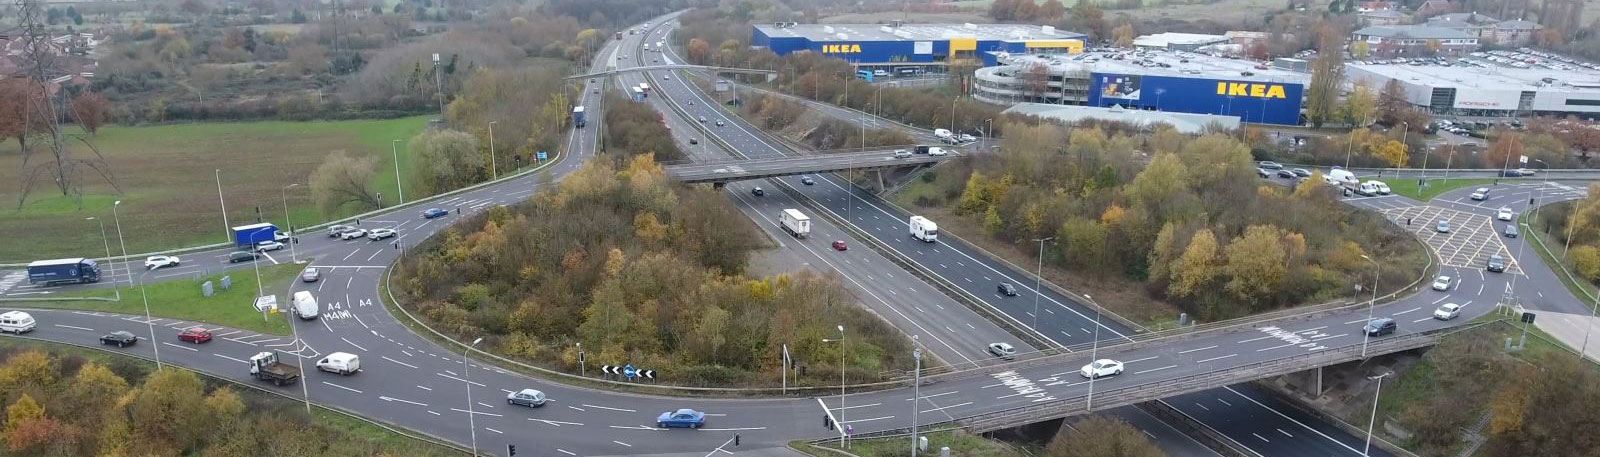 Aerial view of a roundabout over a motorway with an ikea next to it